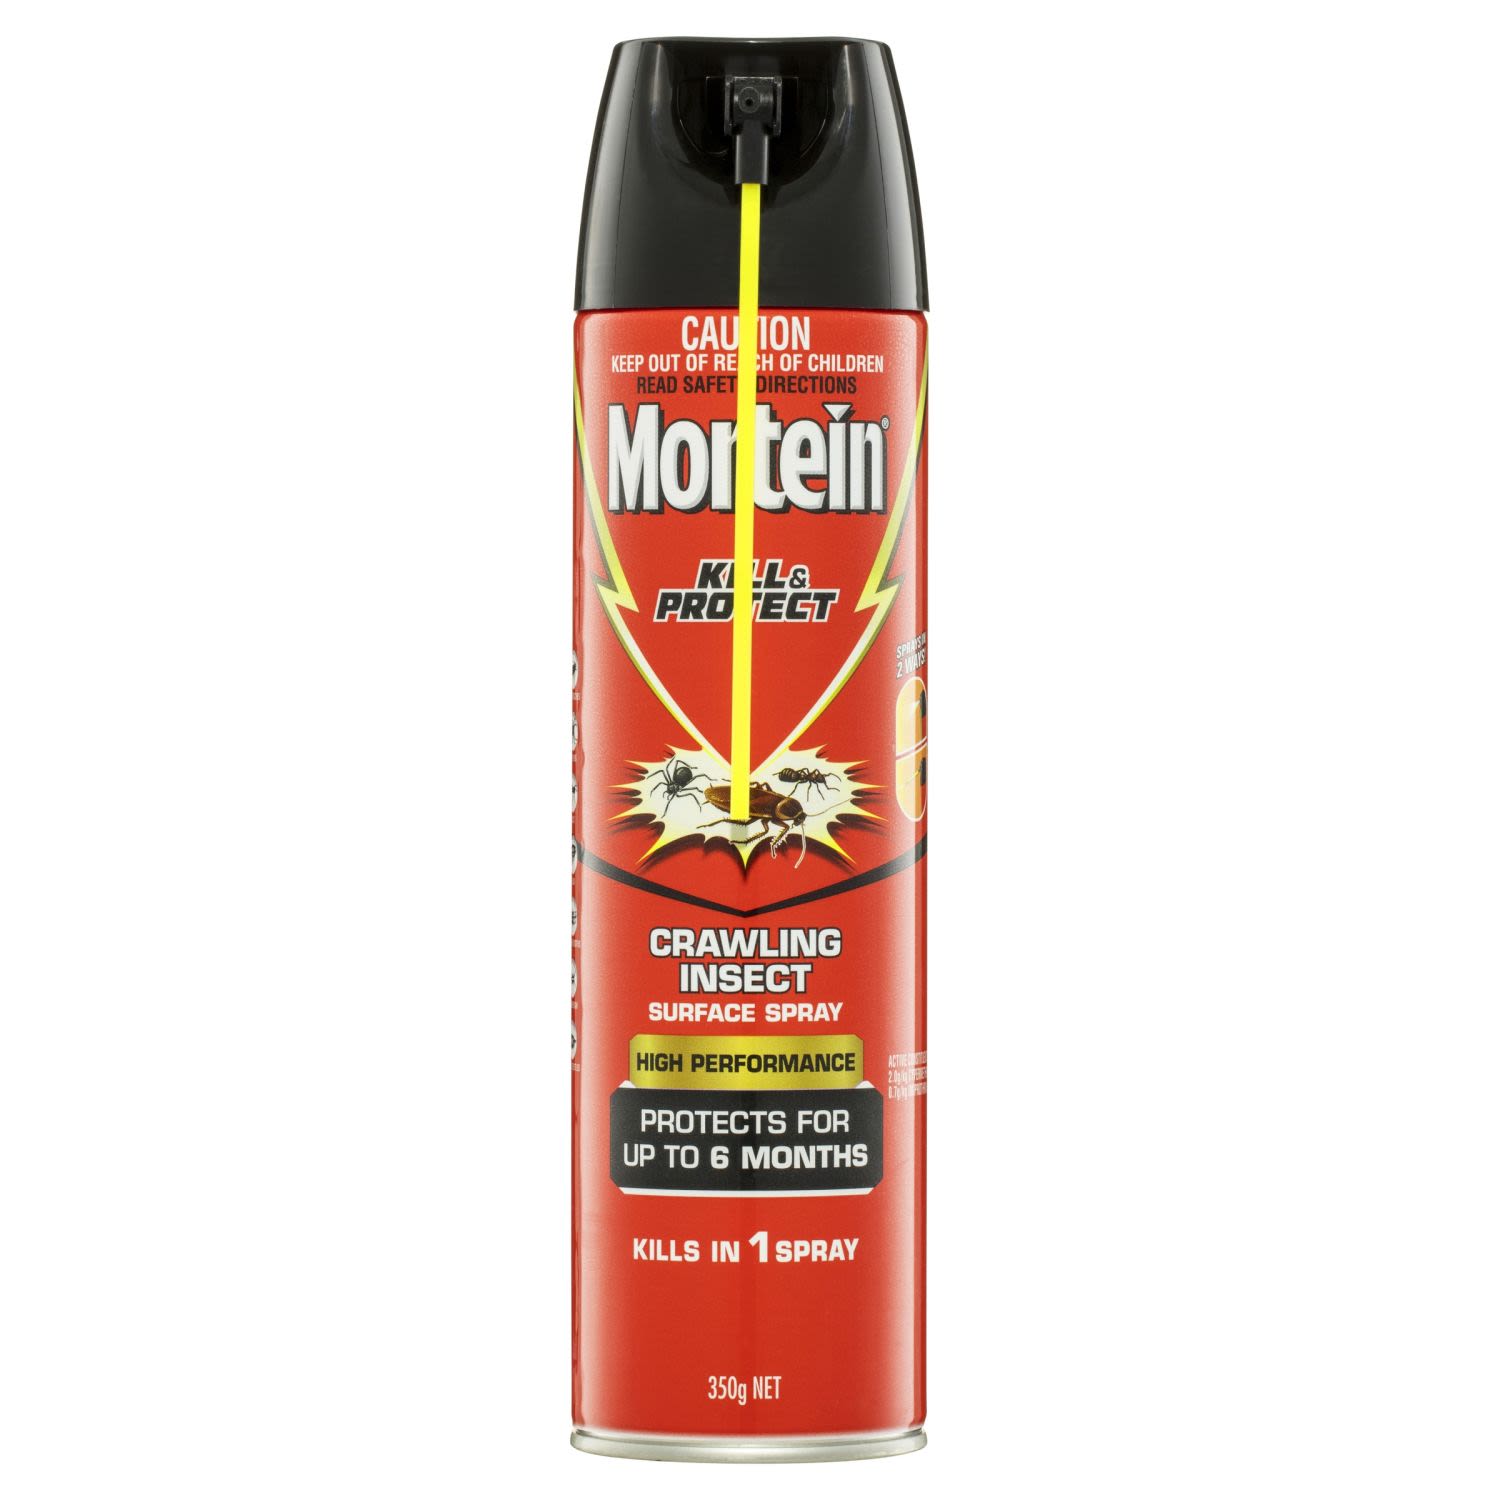 Mortein Easy Reach Surface Spray Crawling Insect Killer, 350 Gram